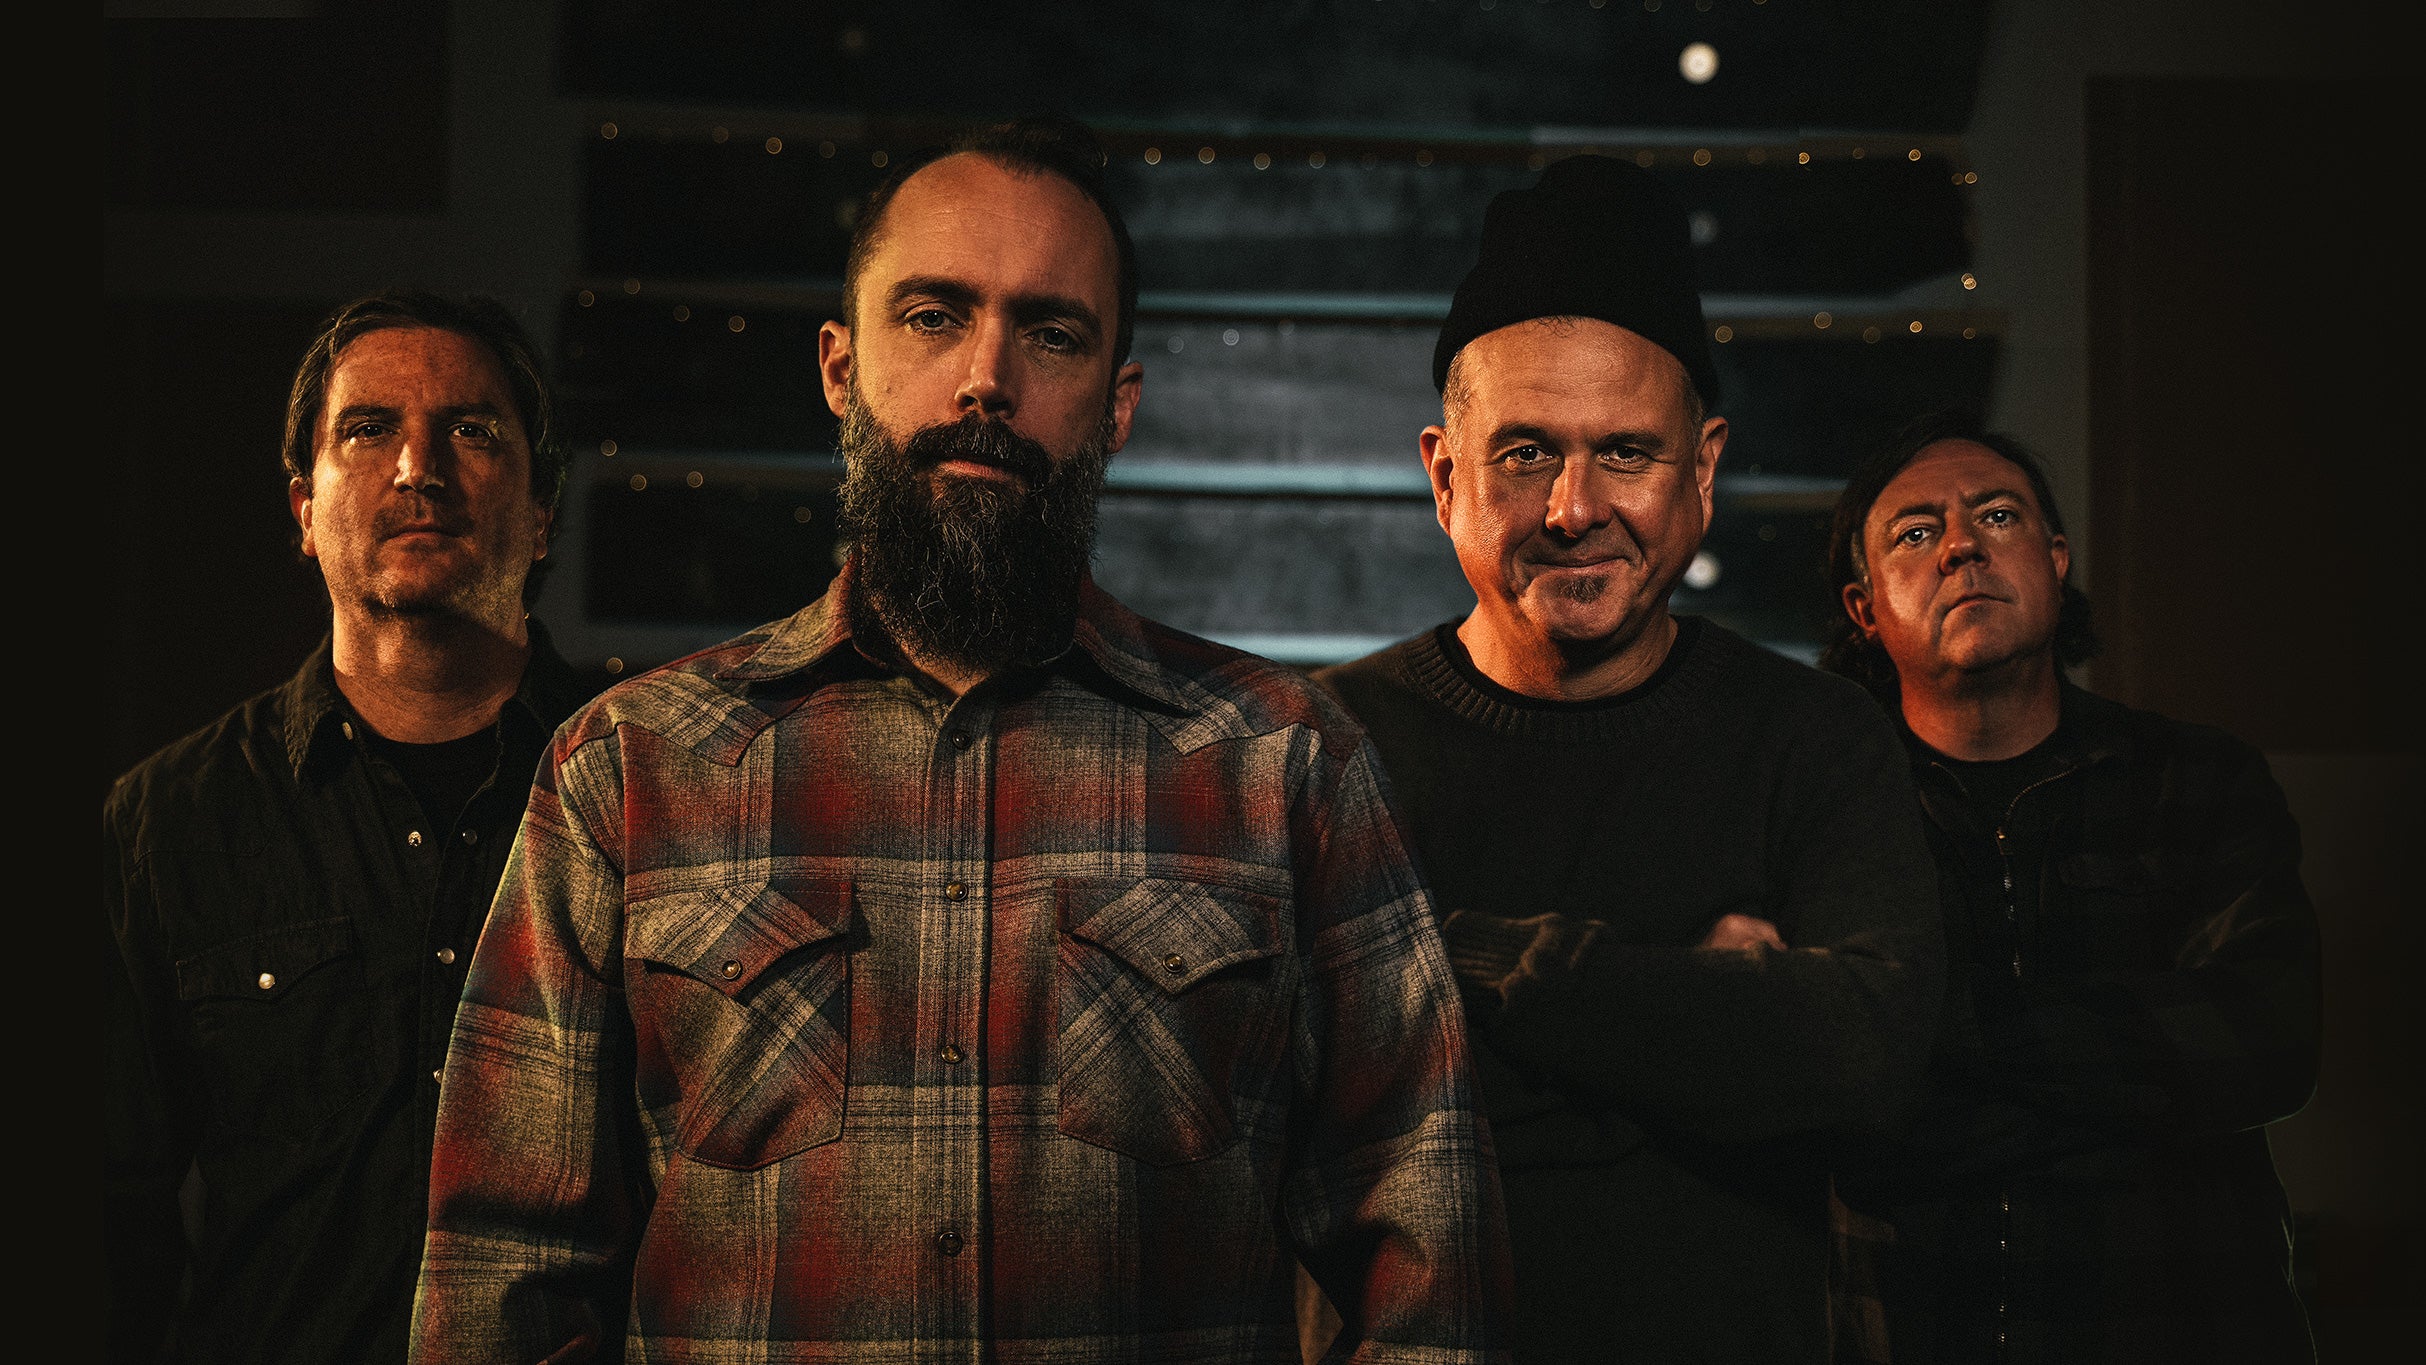 Clutch free pre-sale pa55w0rd for early tickets in Raleigh